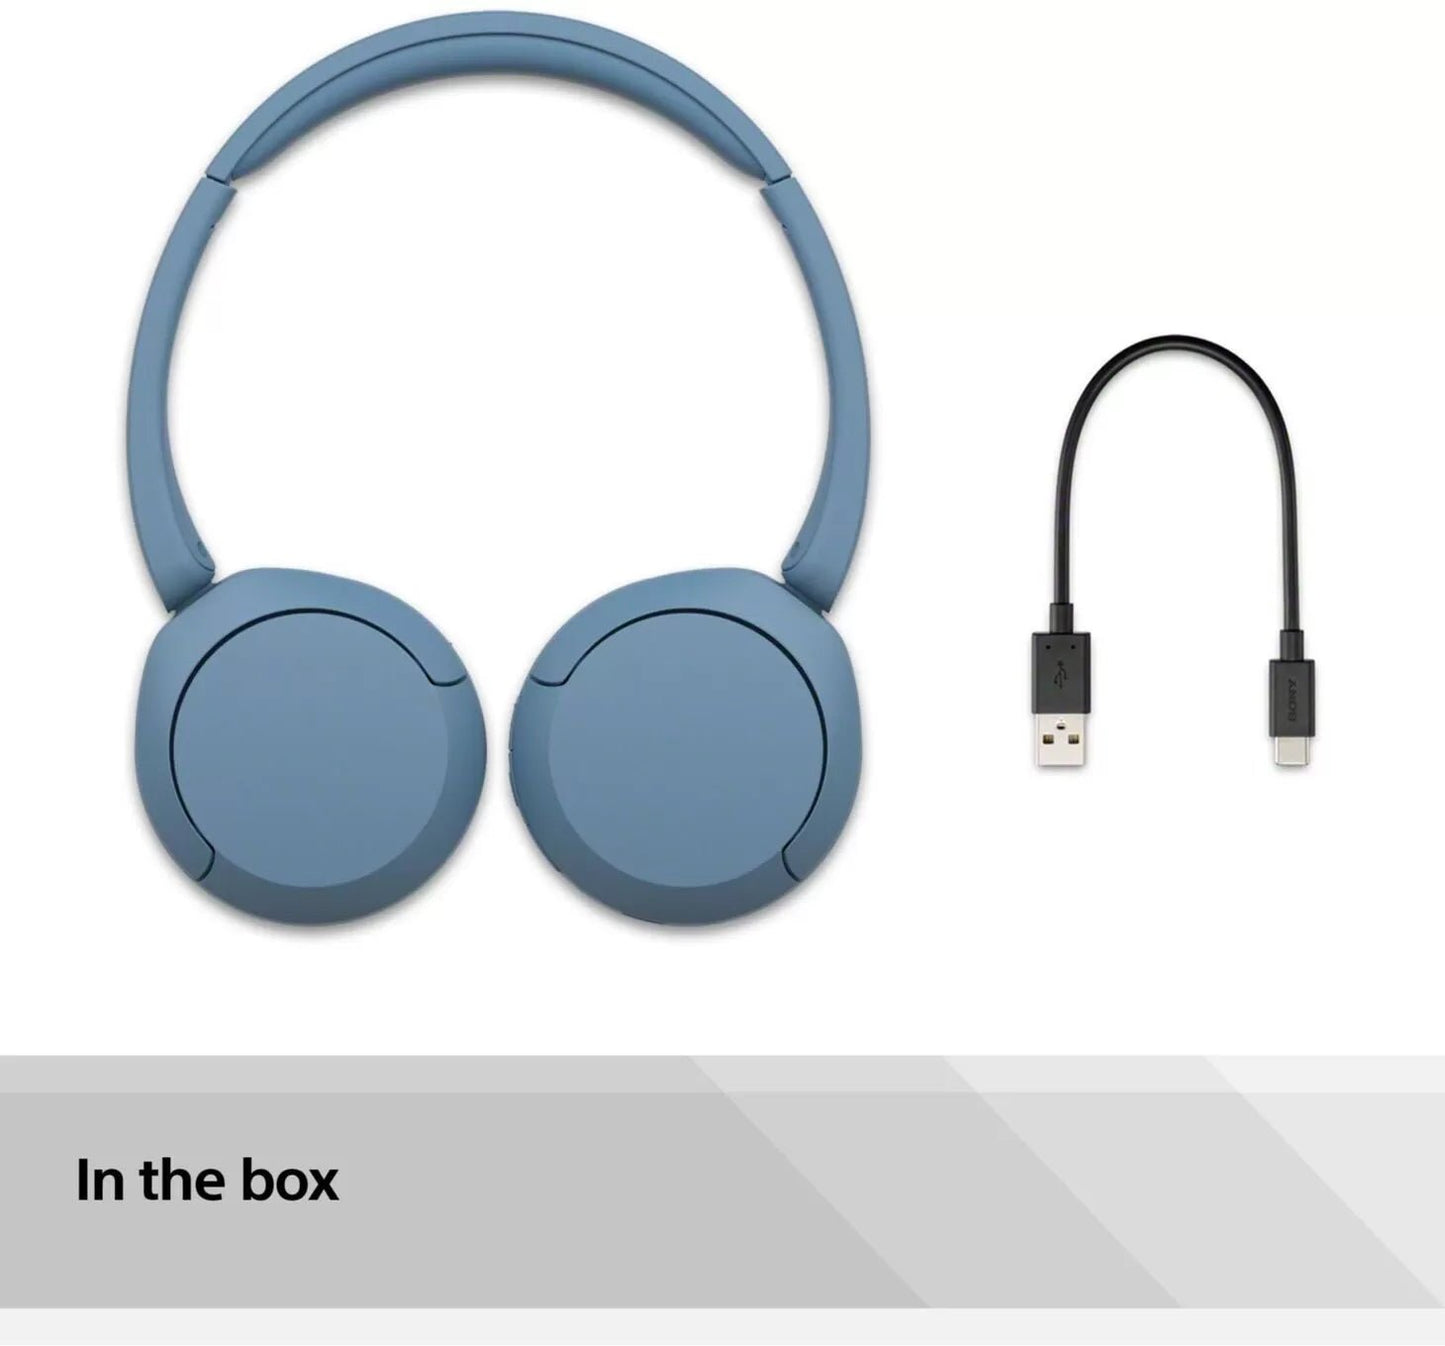 Sony WH-CH520 Bluetooth Wireless On-Ear Headphones with Mic/Remote, Blue - Atlantic Electrics